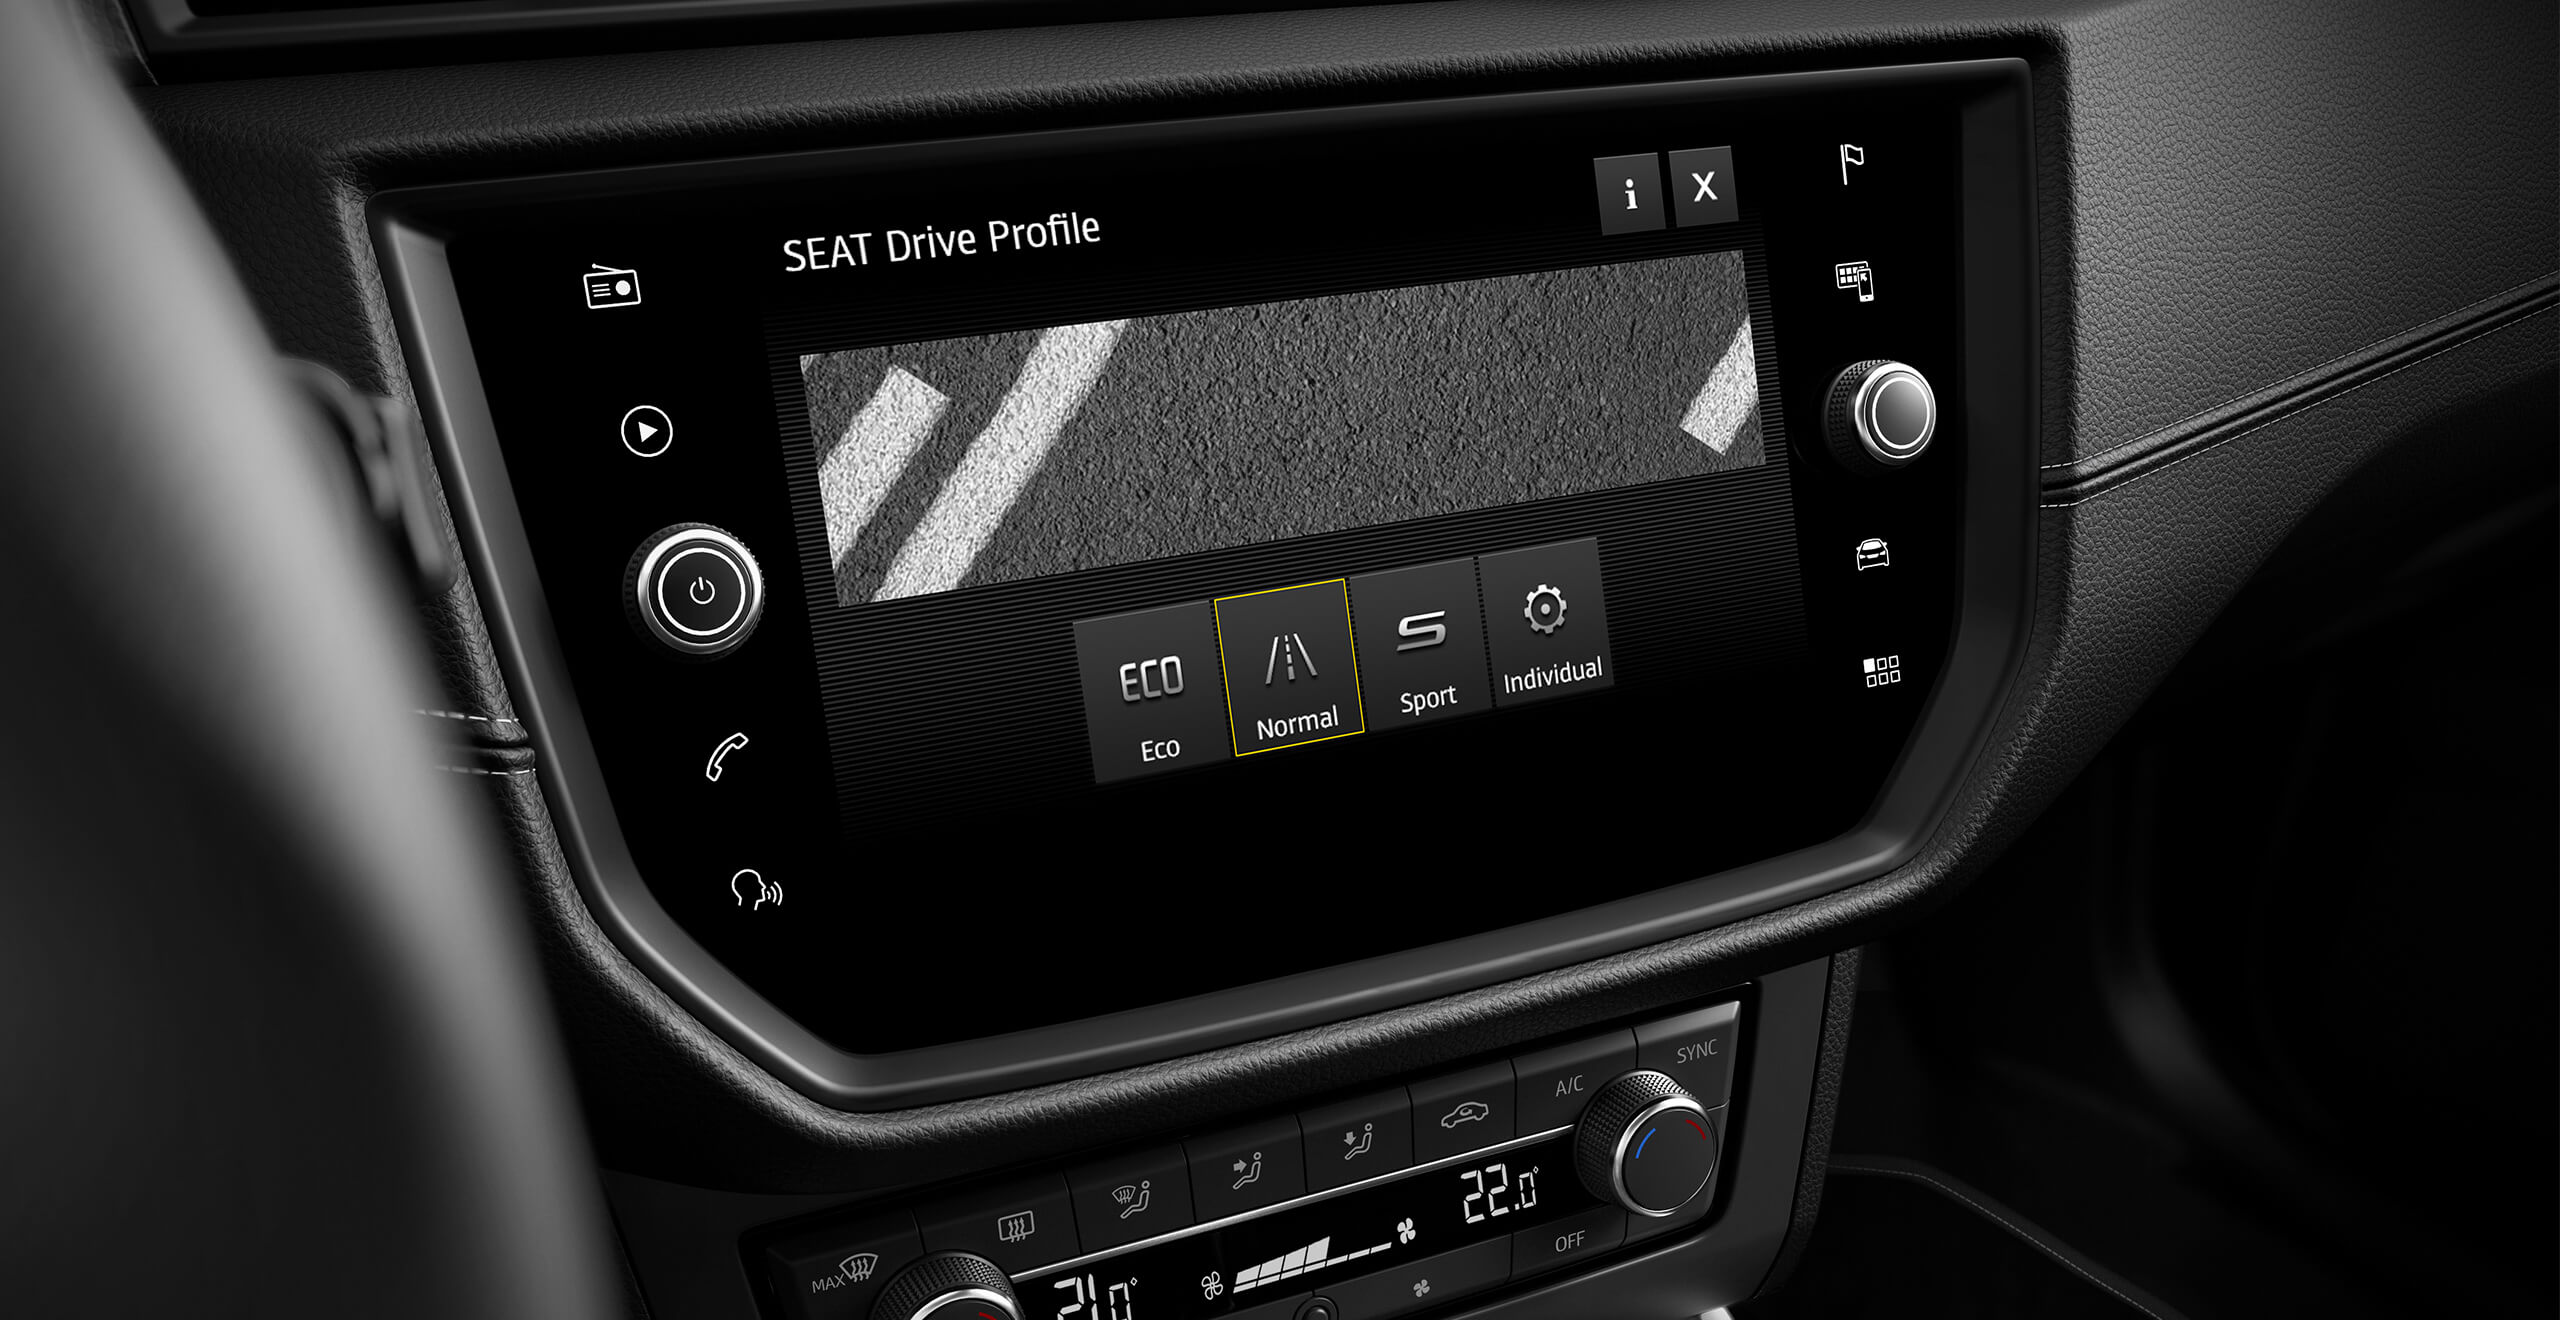 SEAT Arona drive profile technology. Showing console with Stiffer suspension, Sport, Eco options 